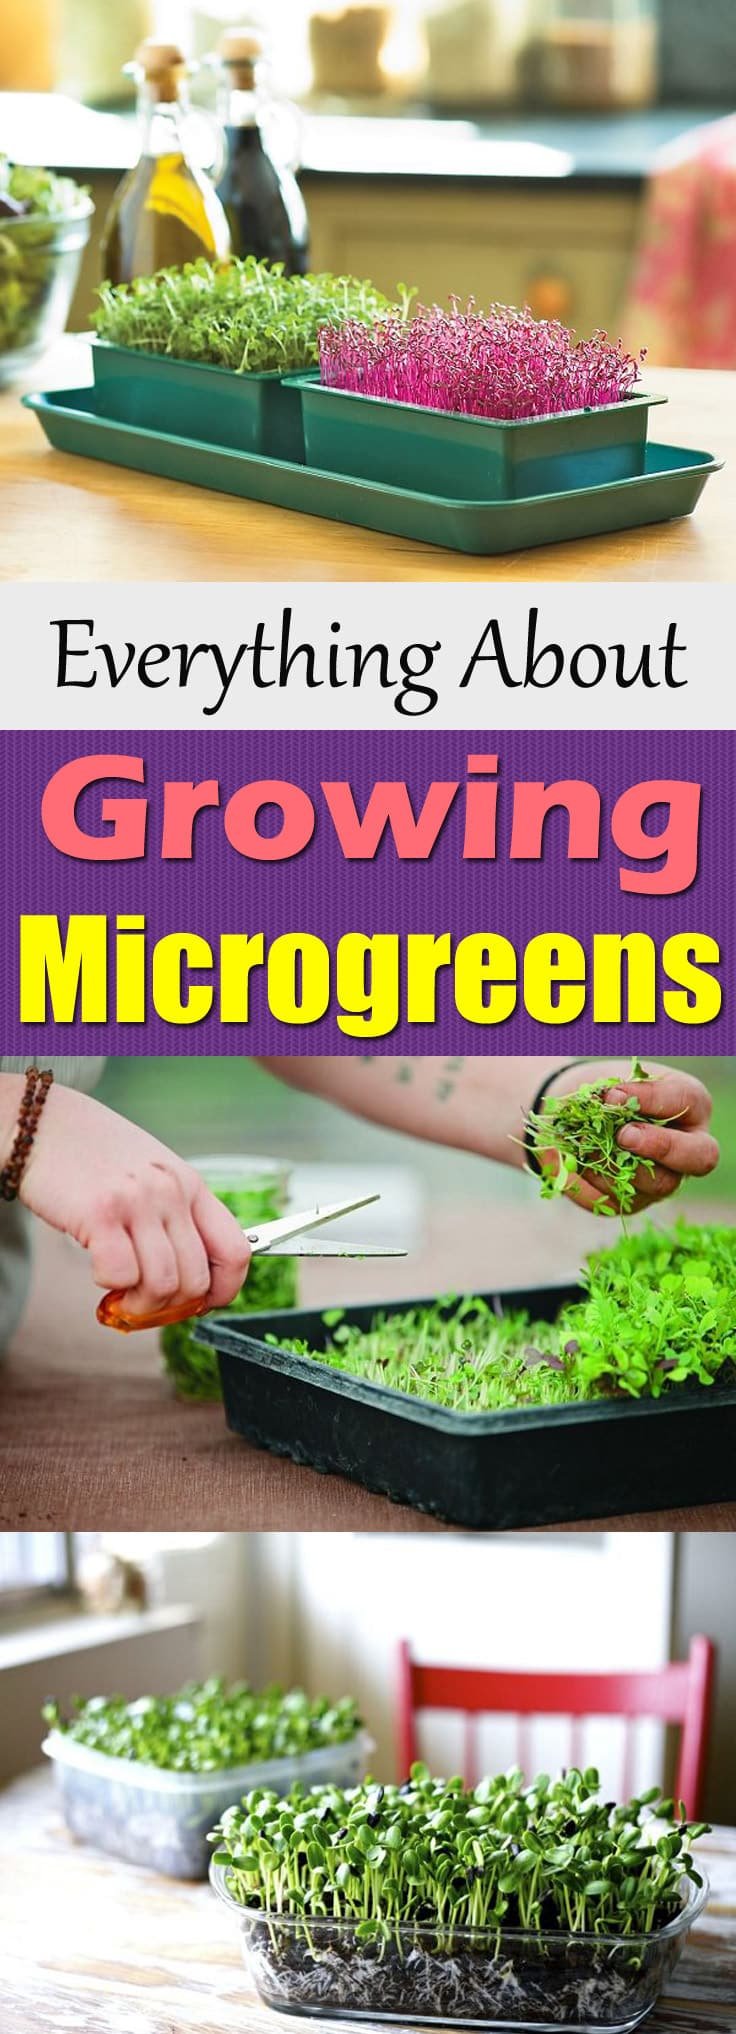 Learn how to grow Microgreens. They are tasty and nutritious. Growing microgreens indoors is also possible. Must check out!